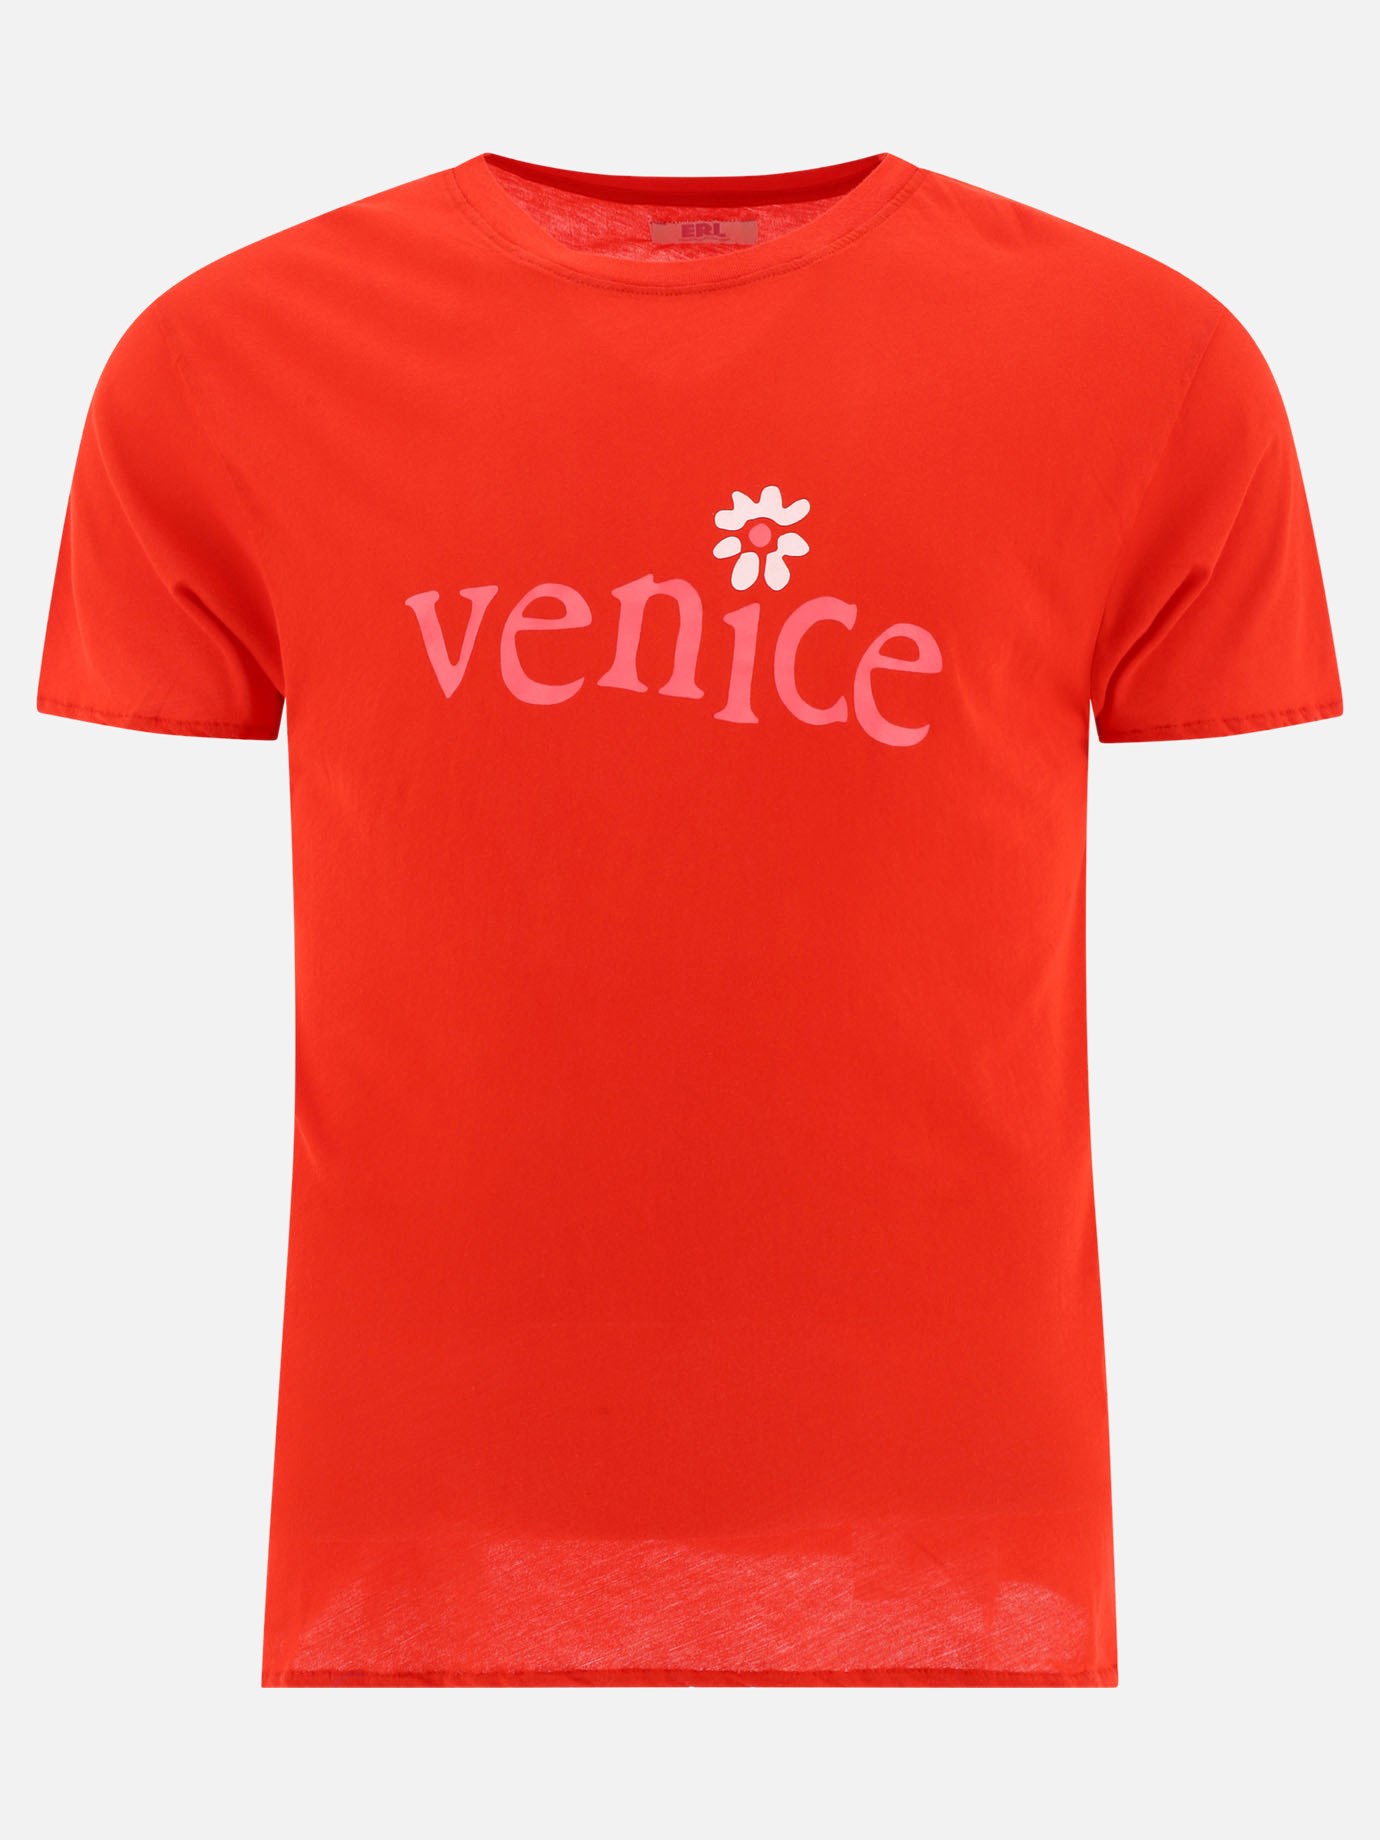  Venice  t-shirtby ERL - 0